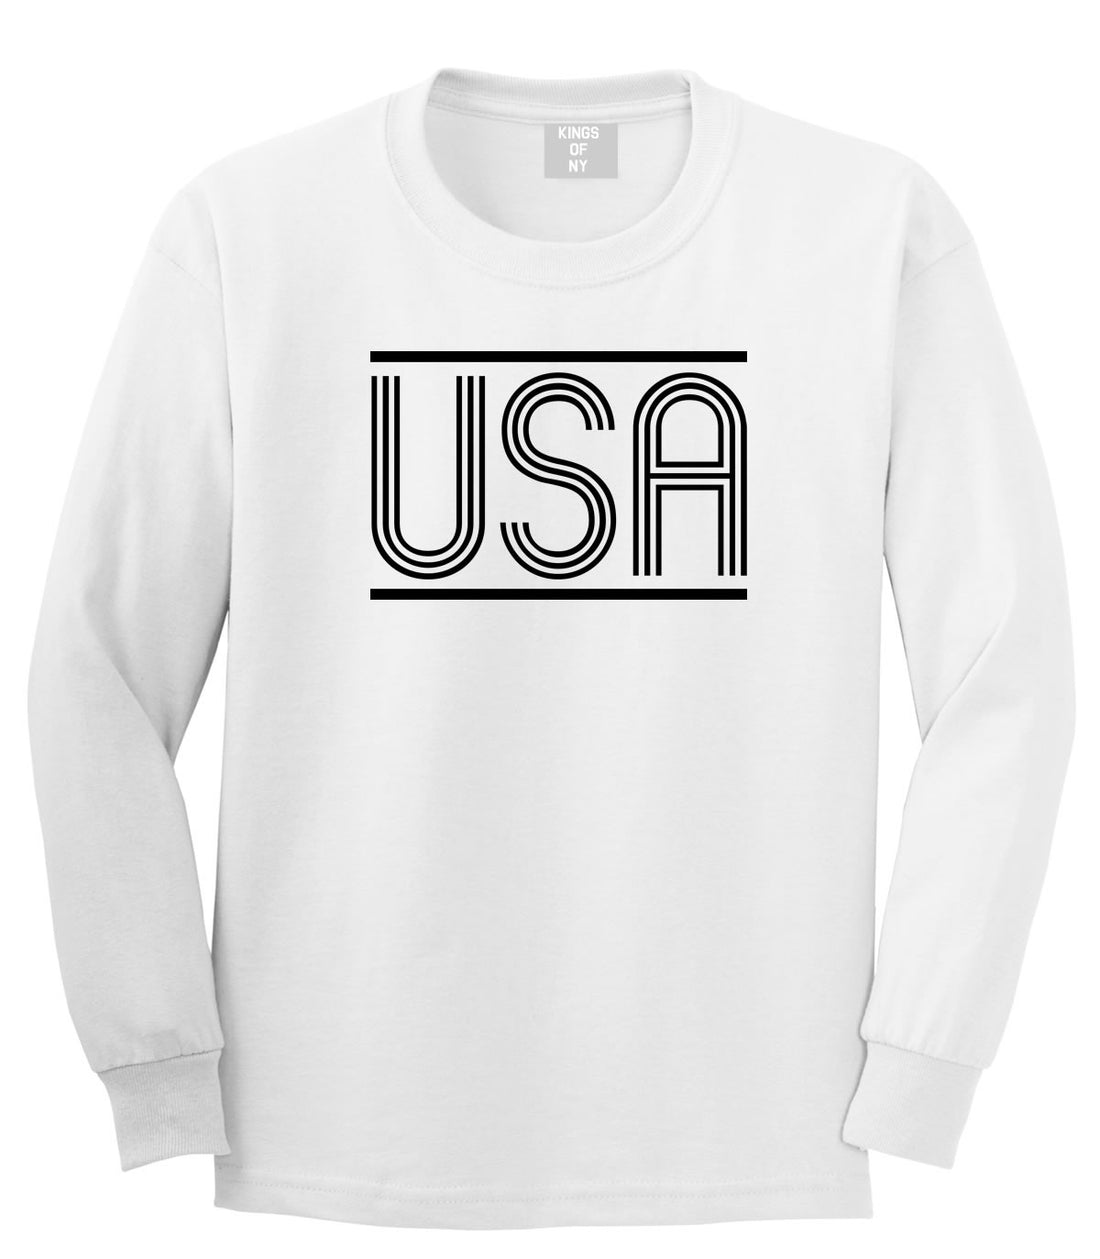 USA America Fall15 Boys Kids Long Sleeve T-Shirt in White by Kings Of NY